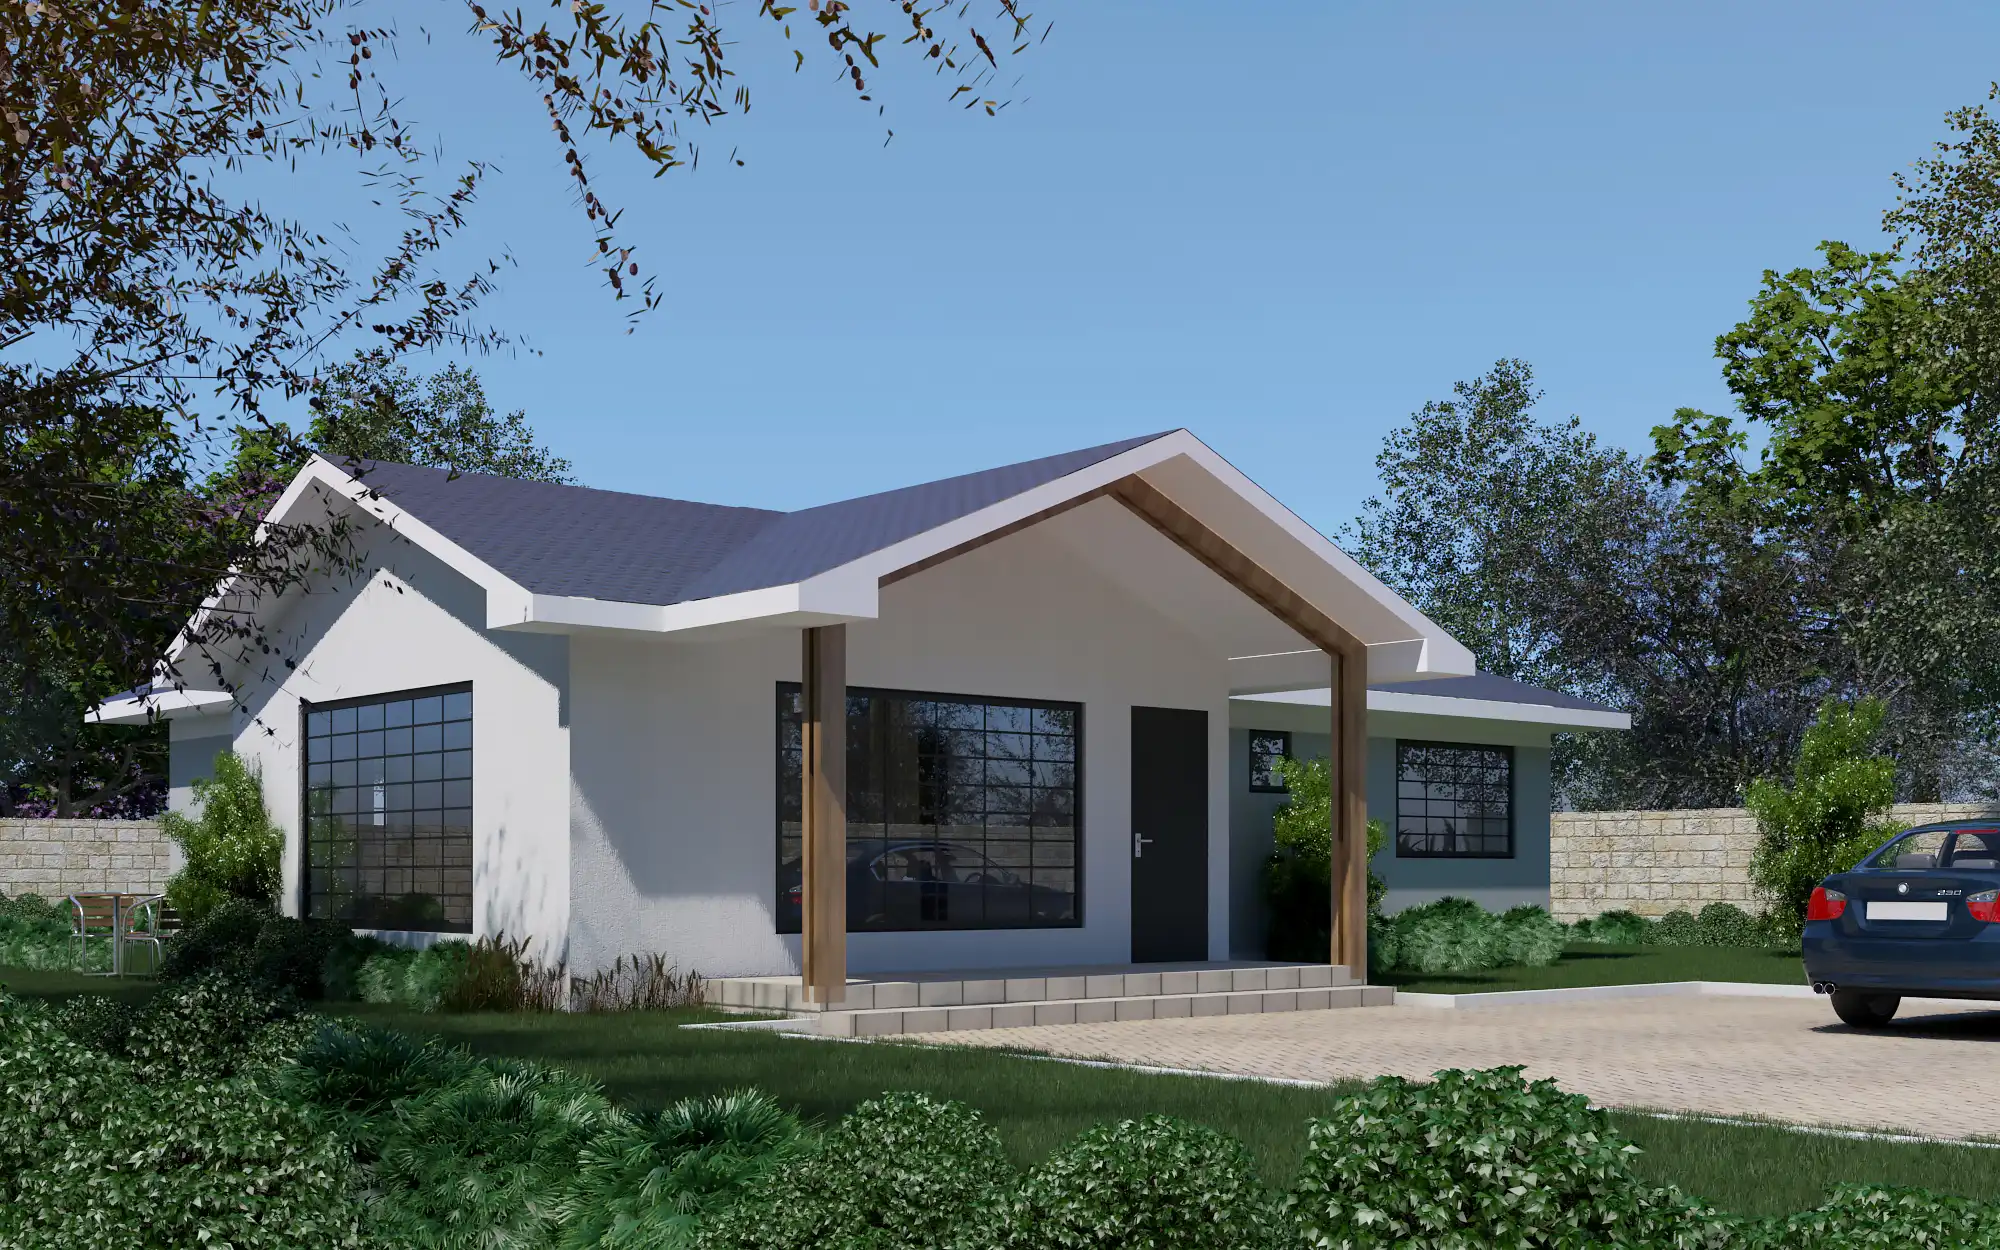 3 Bed Bungalow -ID 3161 - 3161_front.jpg from Inuua Tujenge house plans with 3 bedrooms and 2 bathrooms. ( bungalow )